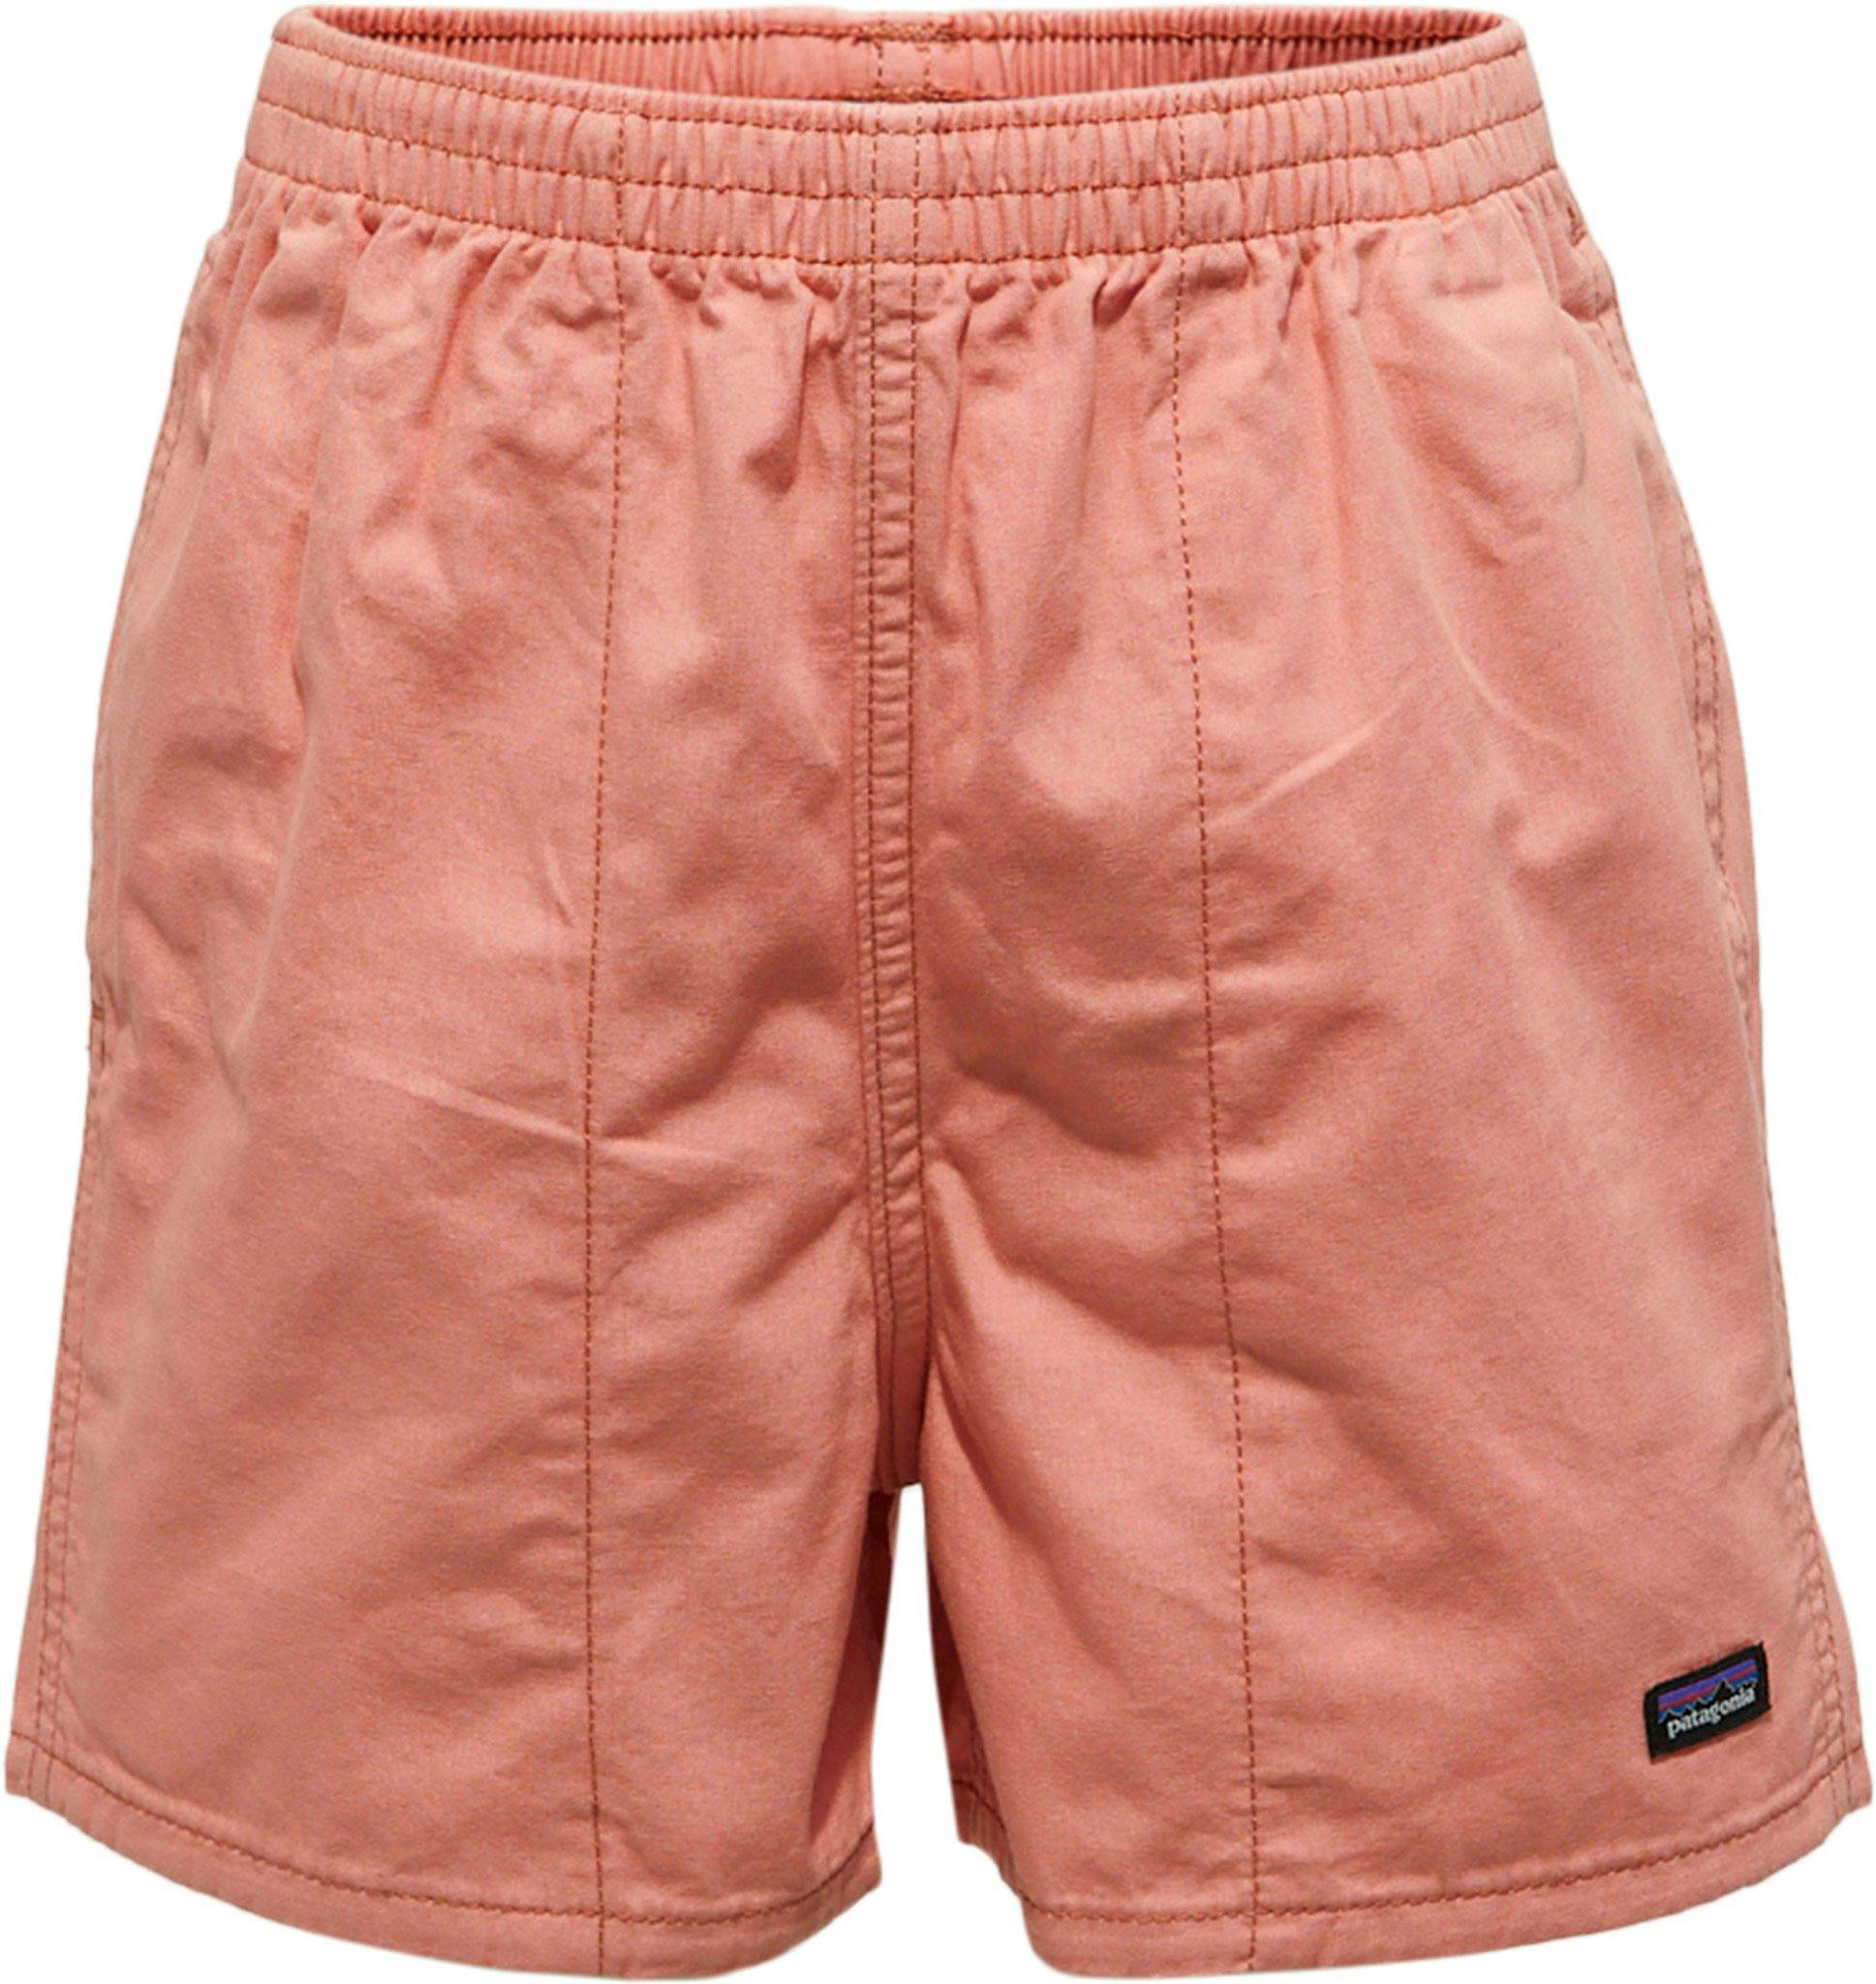 Product image for Funhoggers Cotton Shorts - Baby